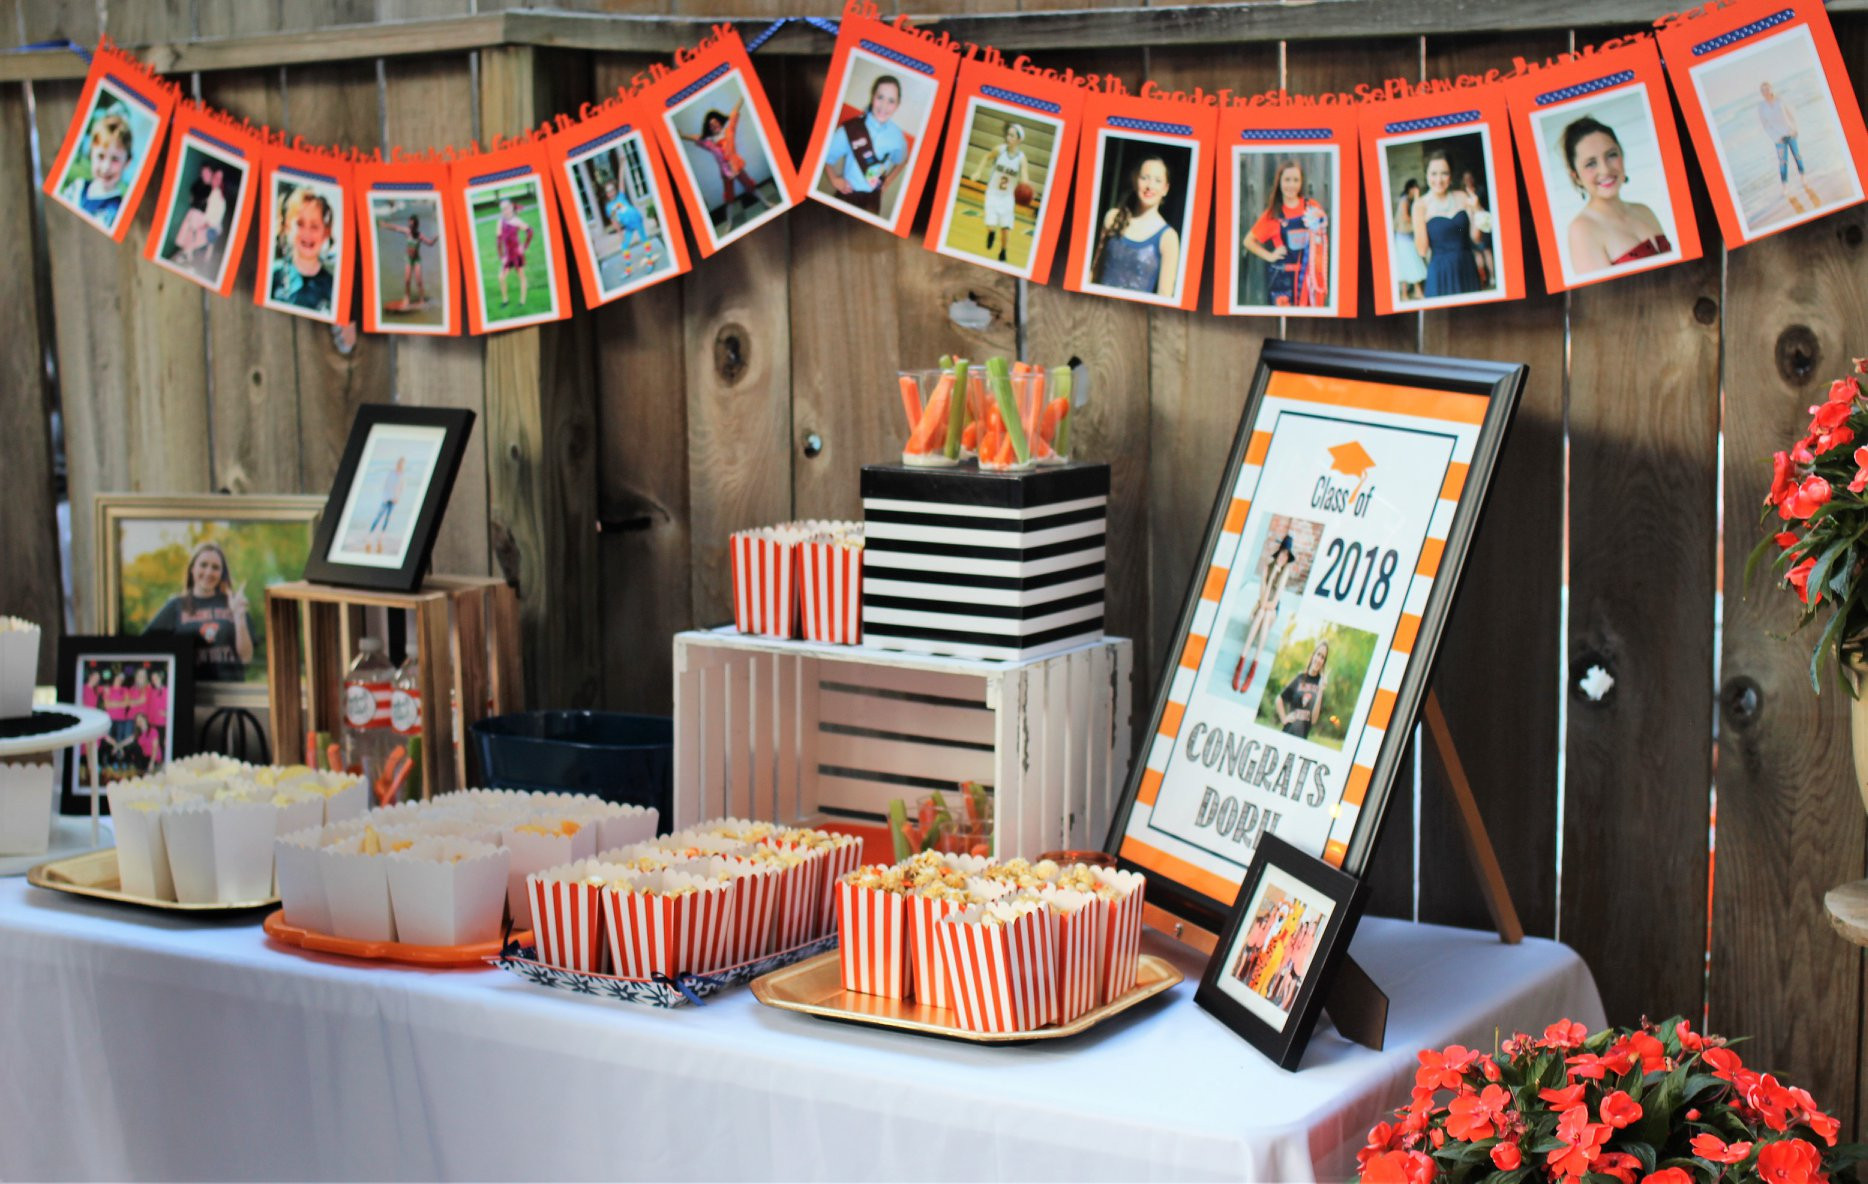 High School Graduation Ideas Party
 Graduation Party Ideas How to Celebrate Your Senior s Big Day